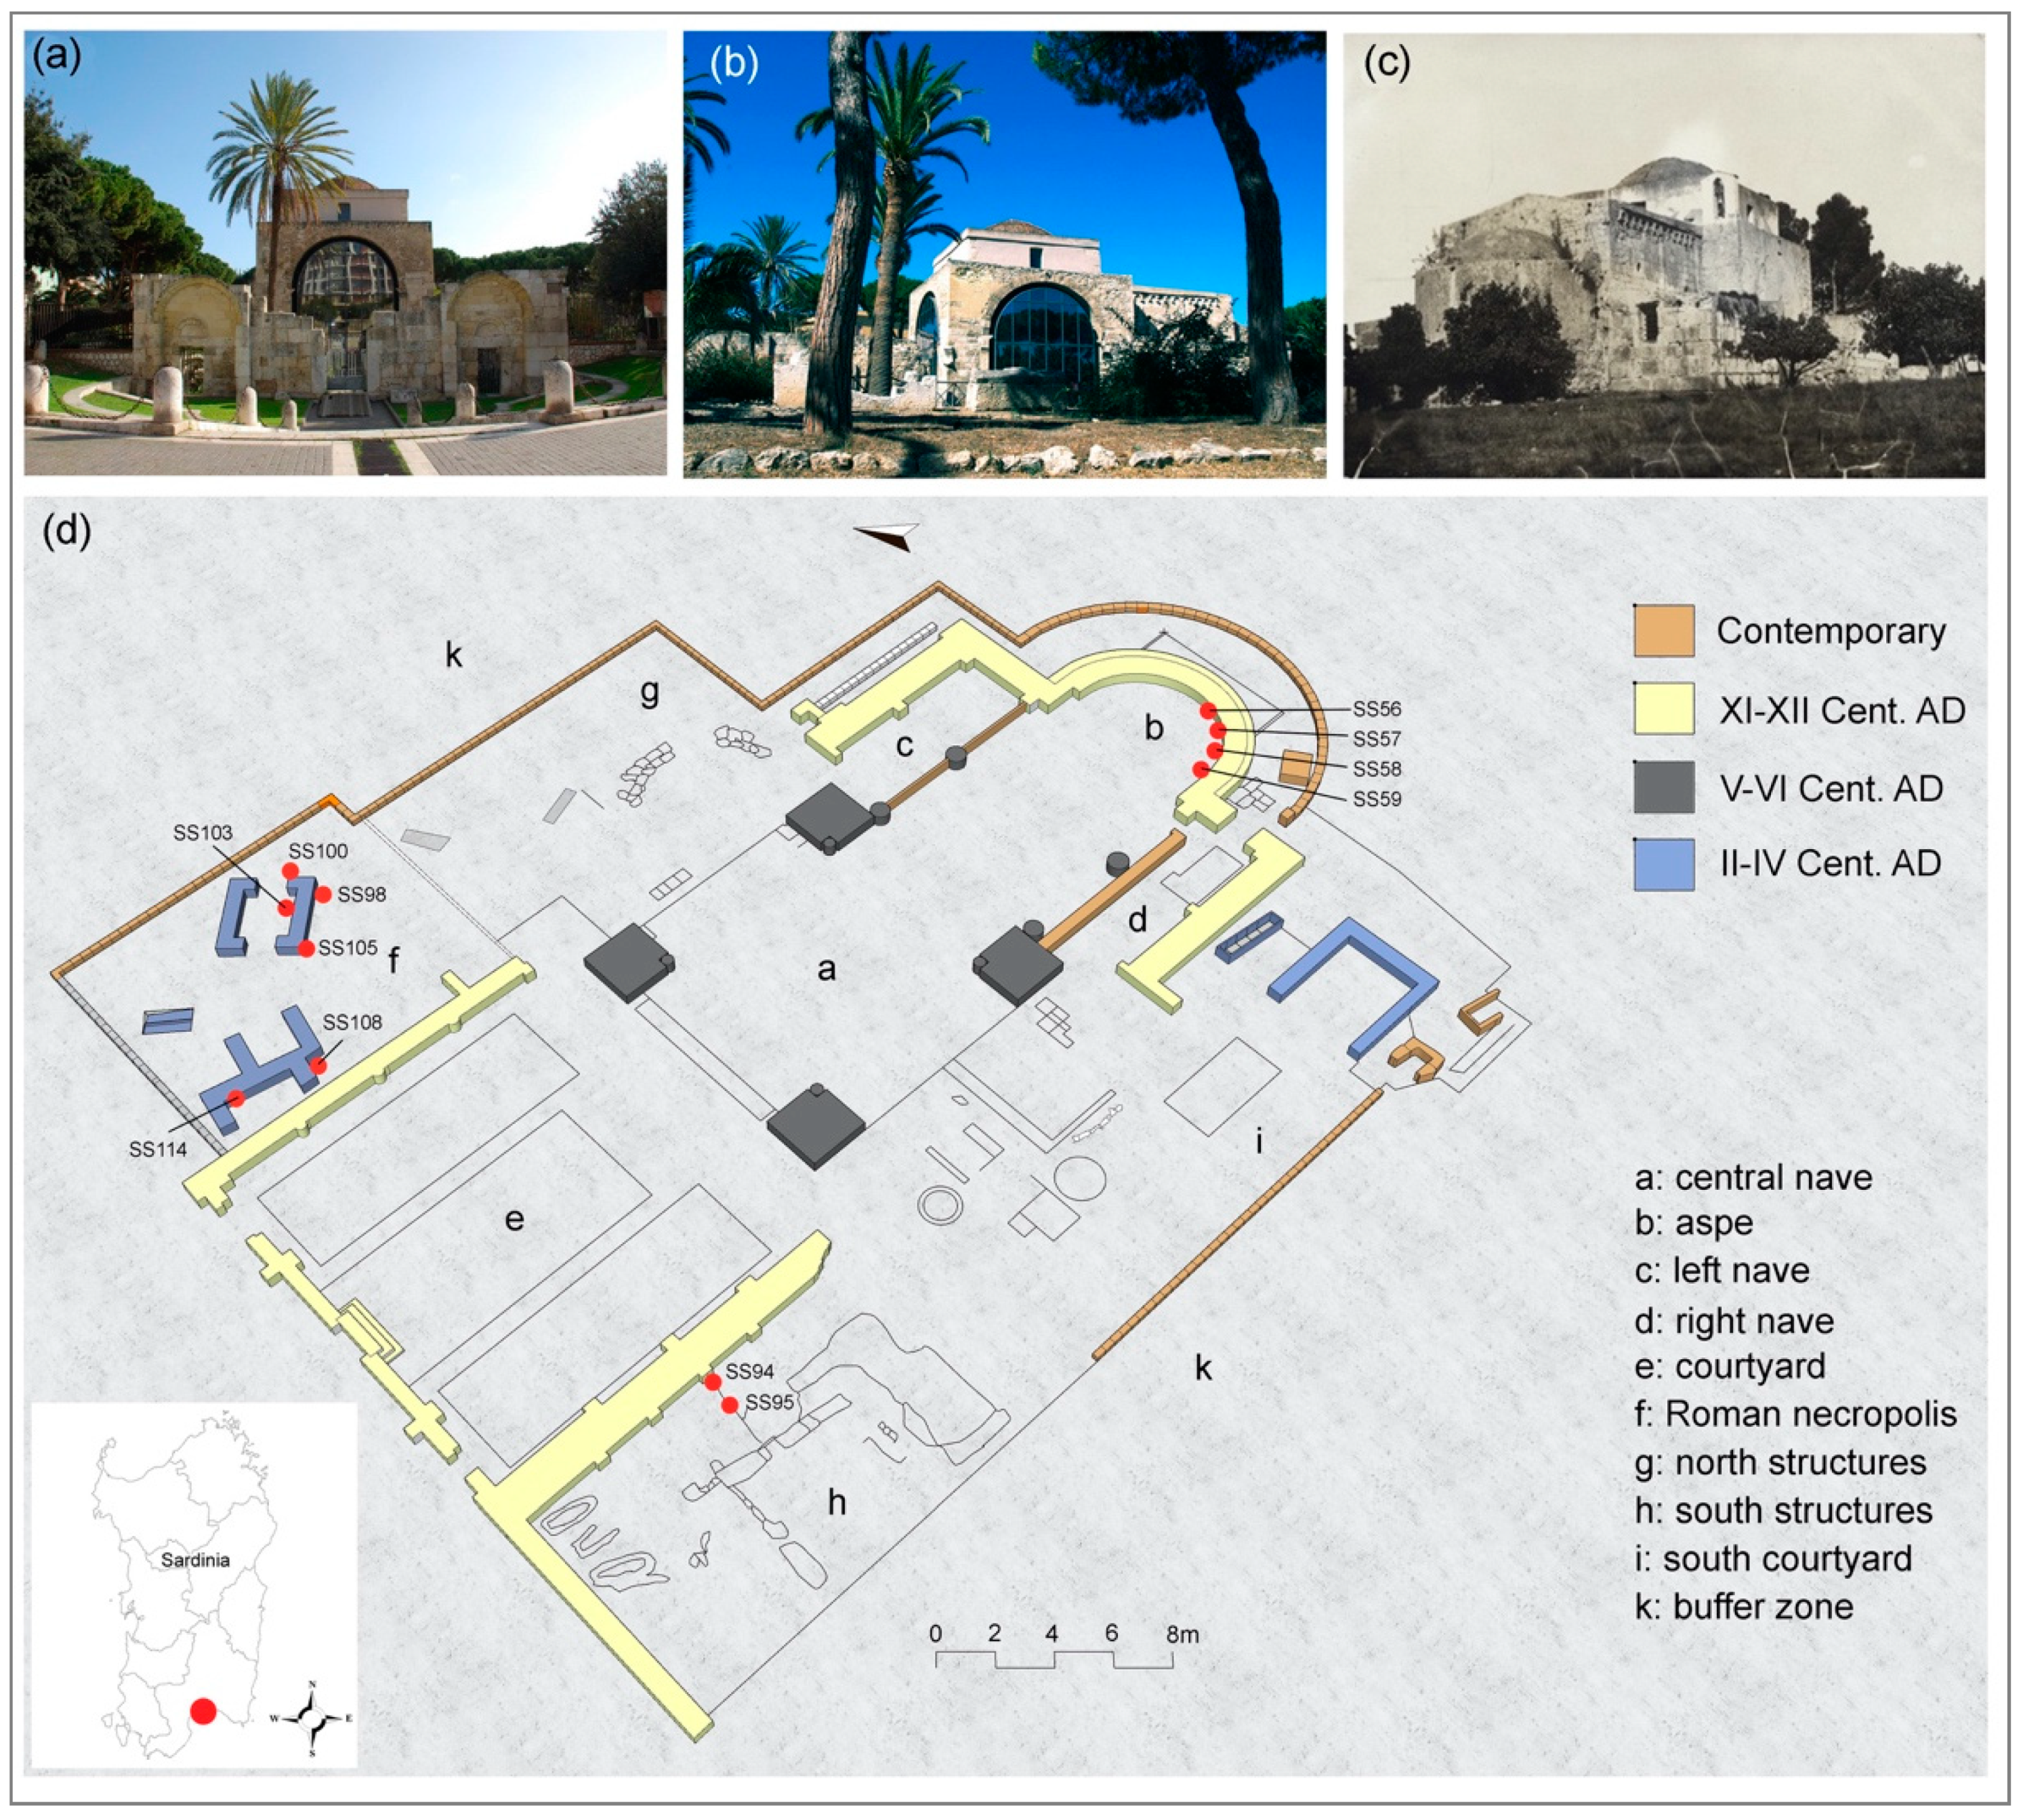 Heritage | Free Full-Text | The San Saturnino Basilica (Cagliari, Italy):  An Up-Close Investigation about the Archaeological Stratigraphy of Mortars  from the Roman to the Middle Ages | HTML